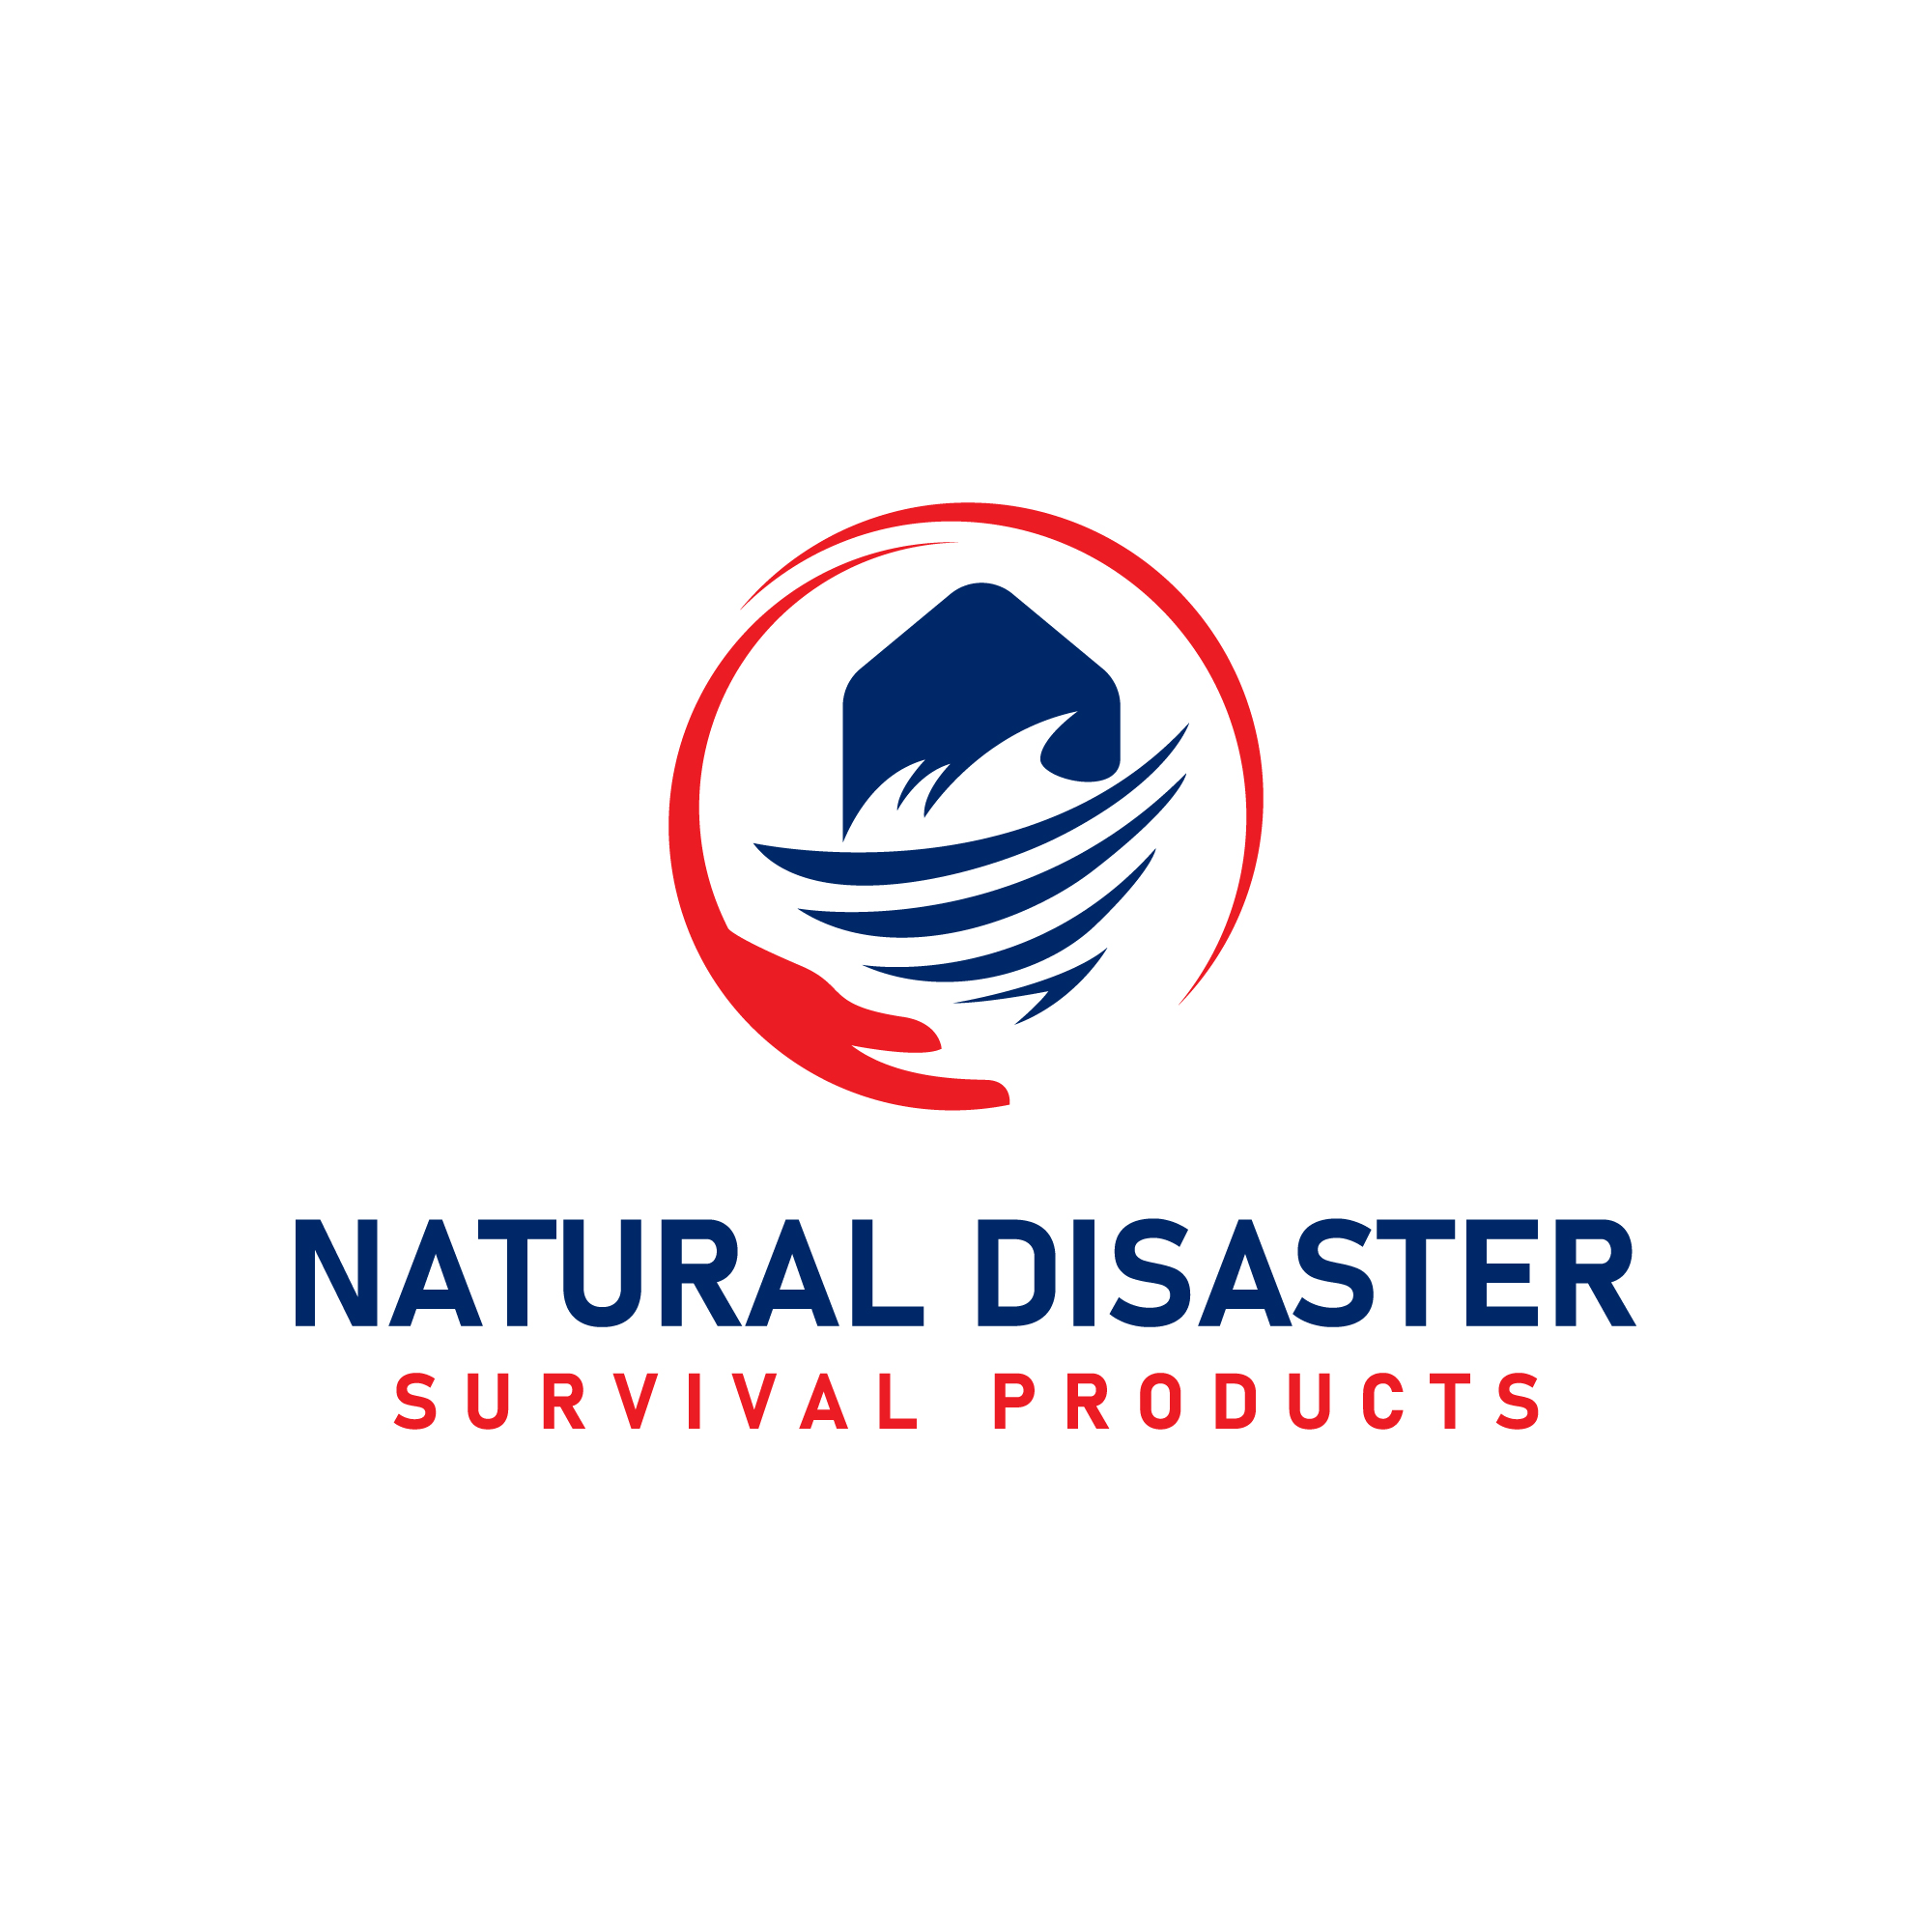 Welcome to Natural Disaster Survival Products - Natural Disaster Survival Products